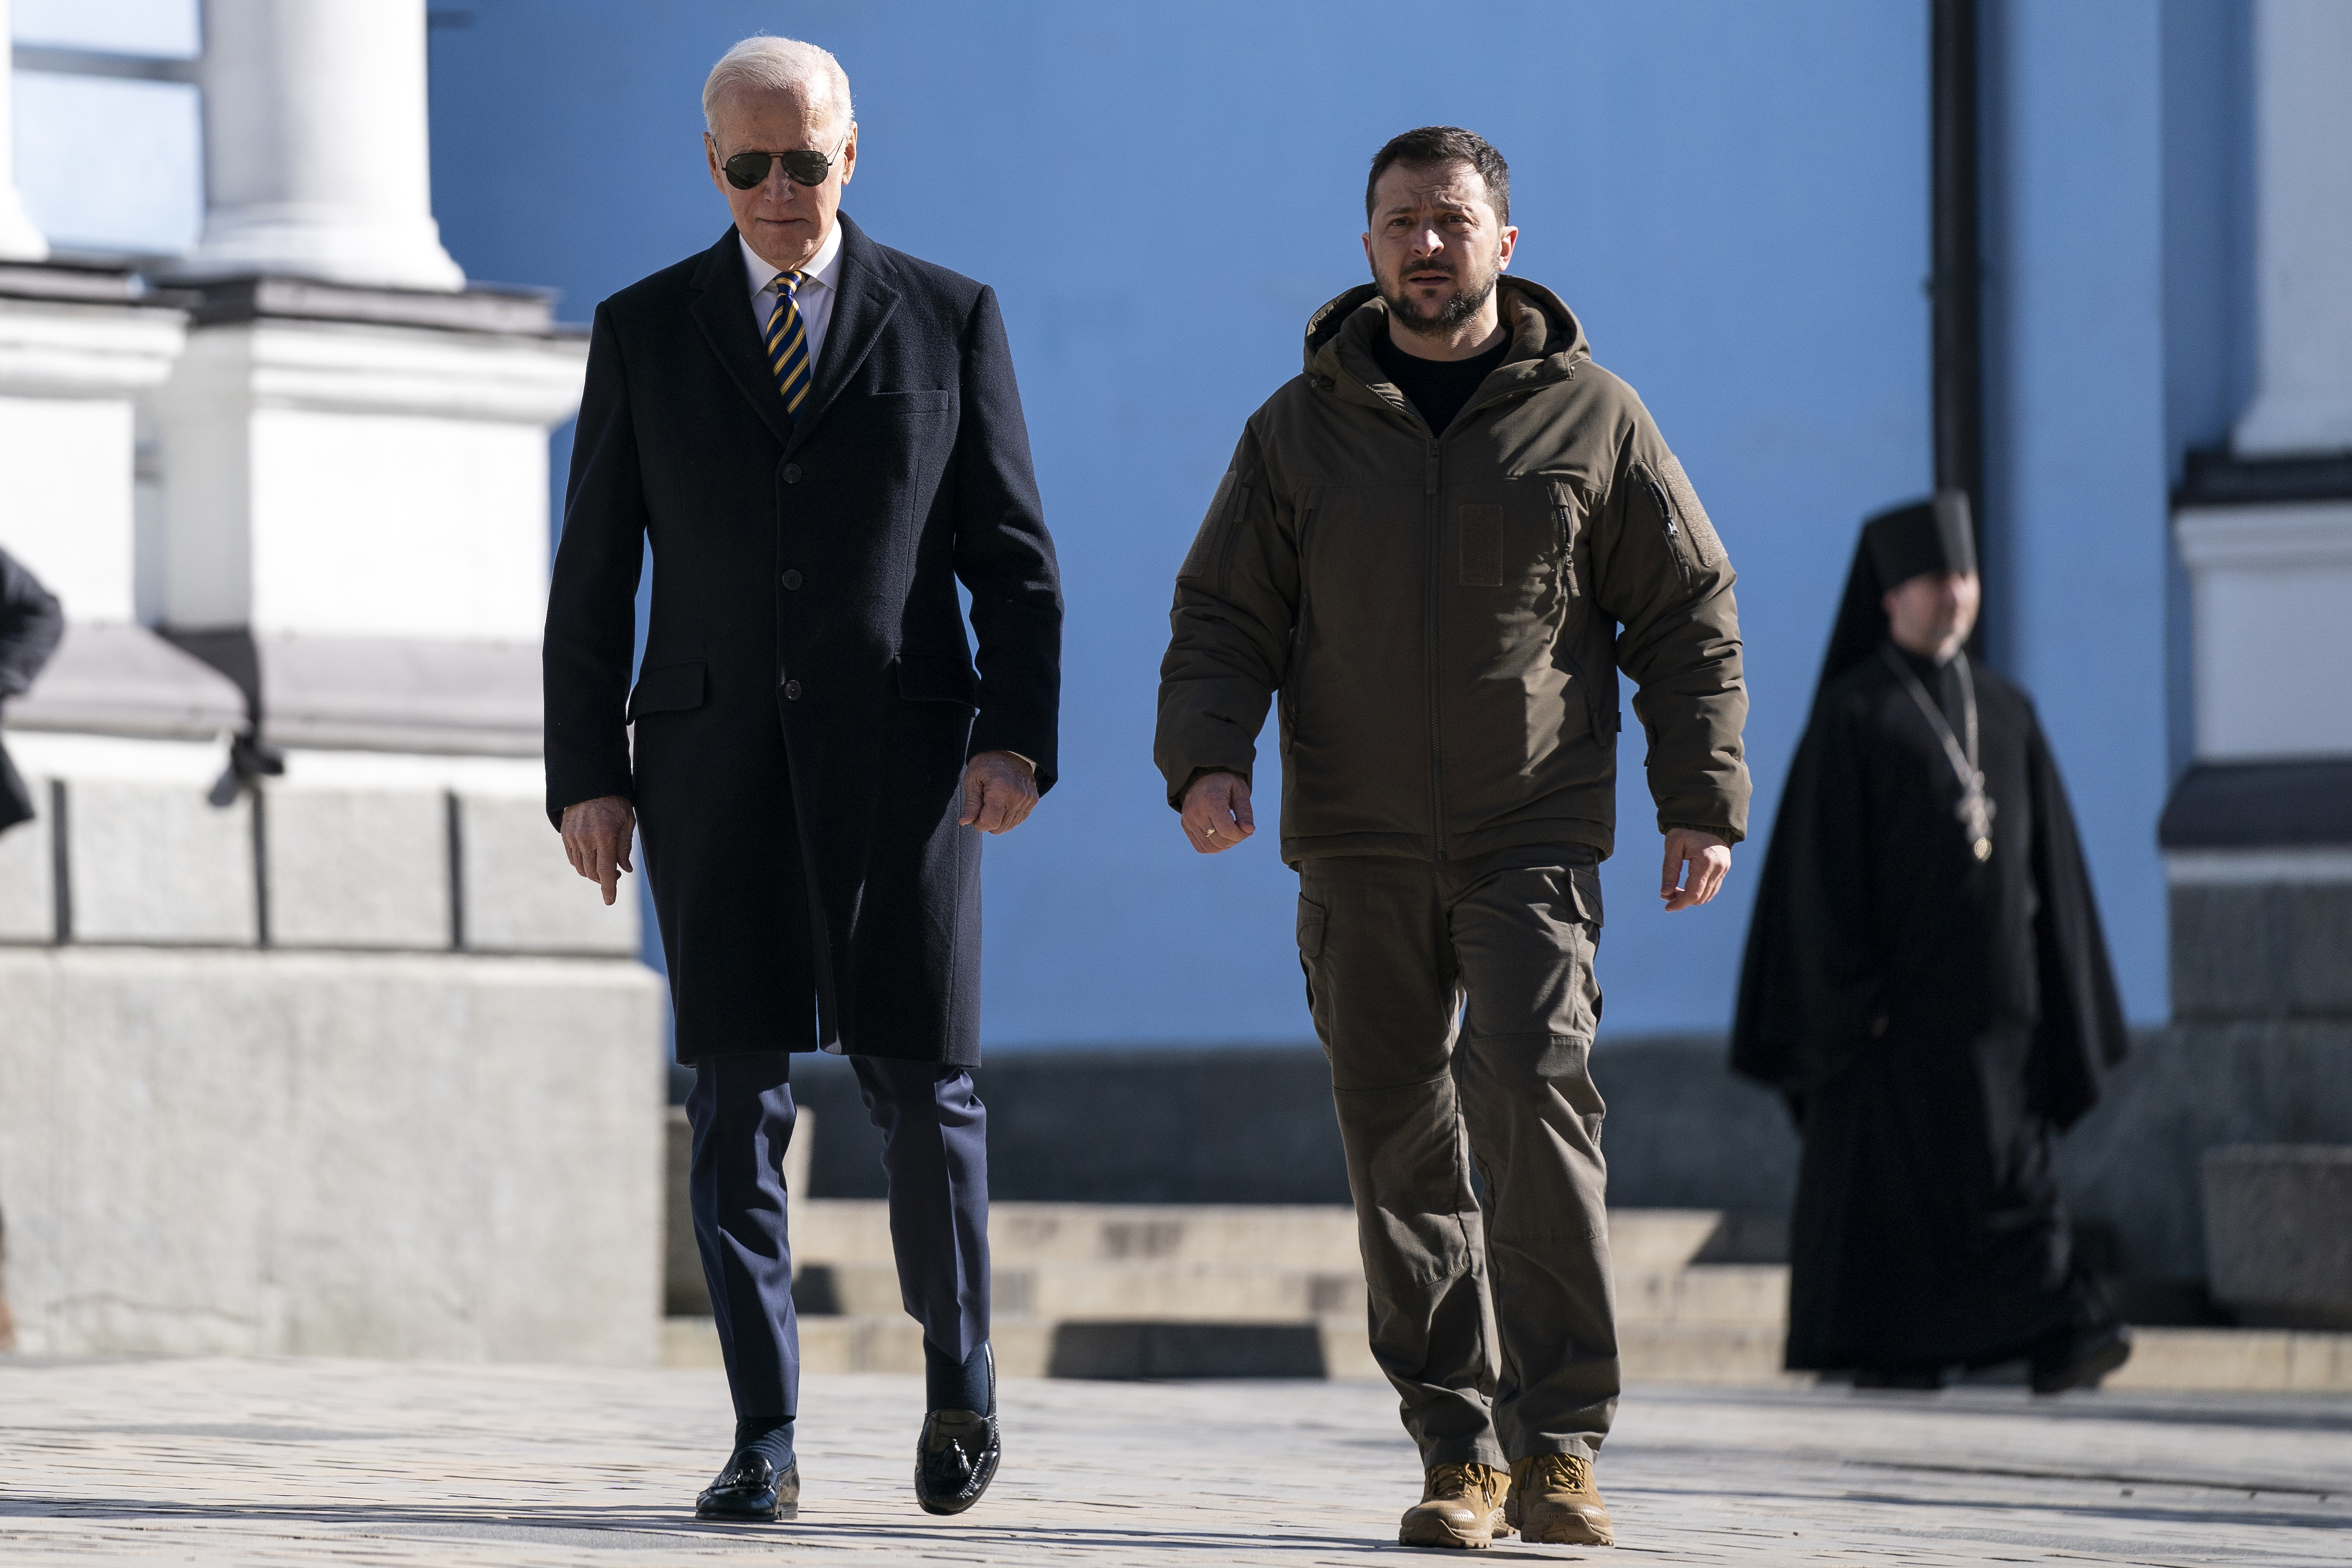 How the US Managed to Get Biden From DC to Kyiv Without Anyone Noticing